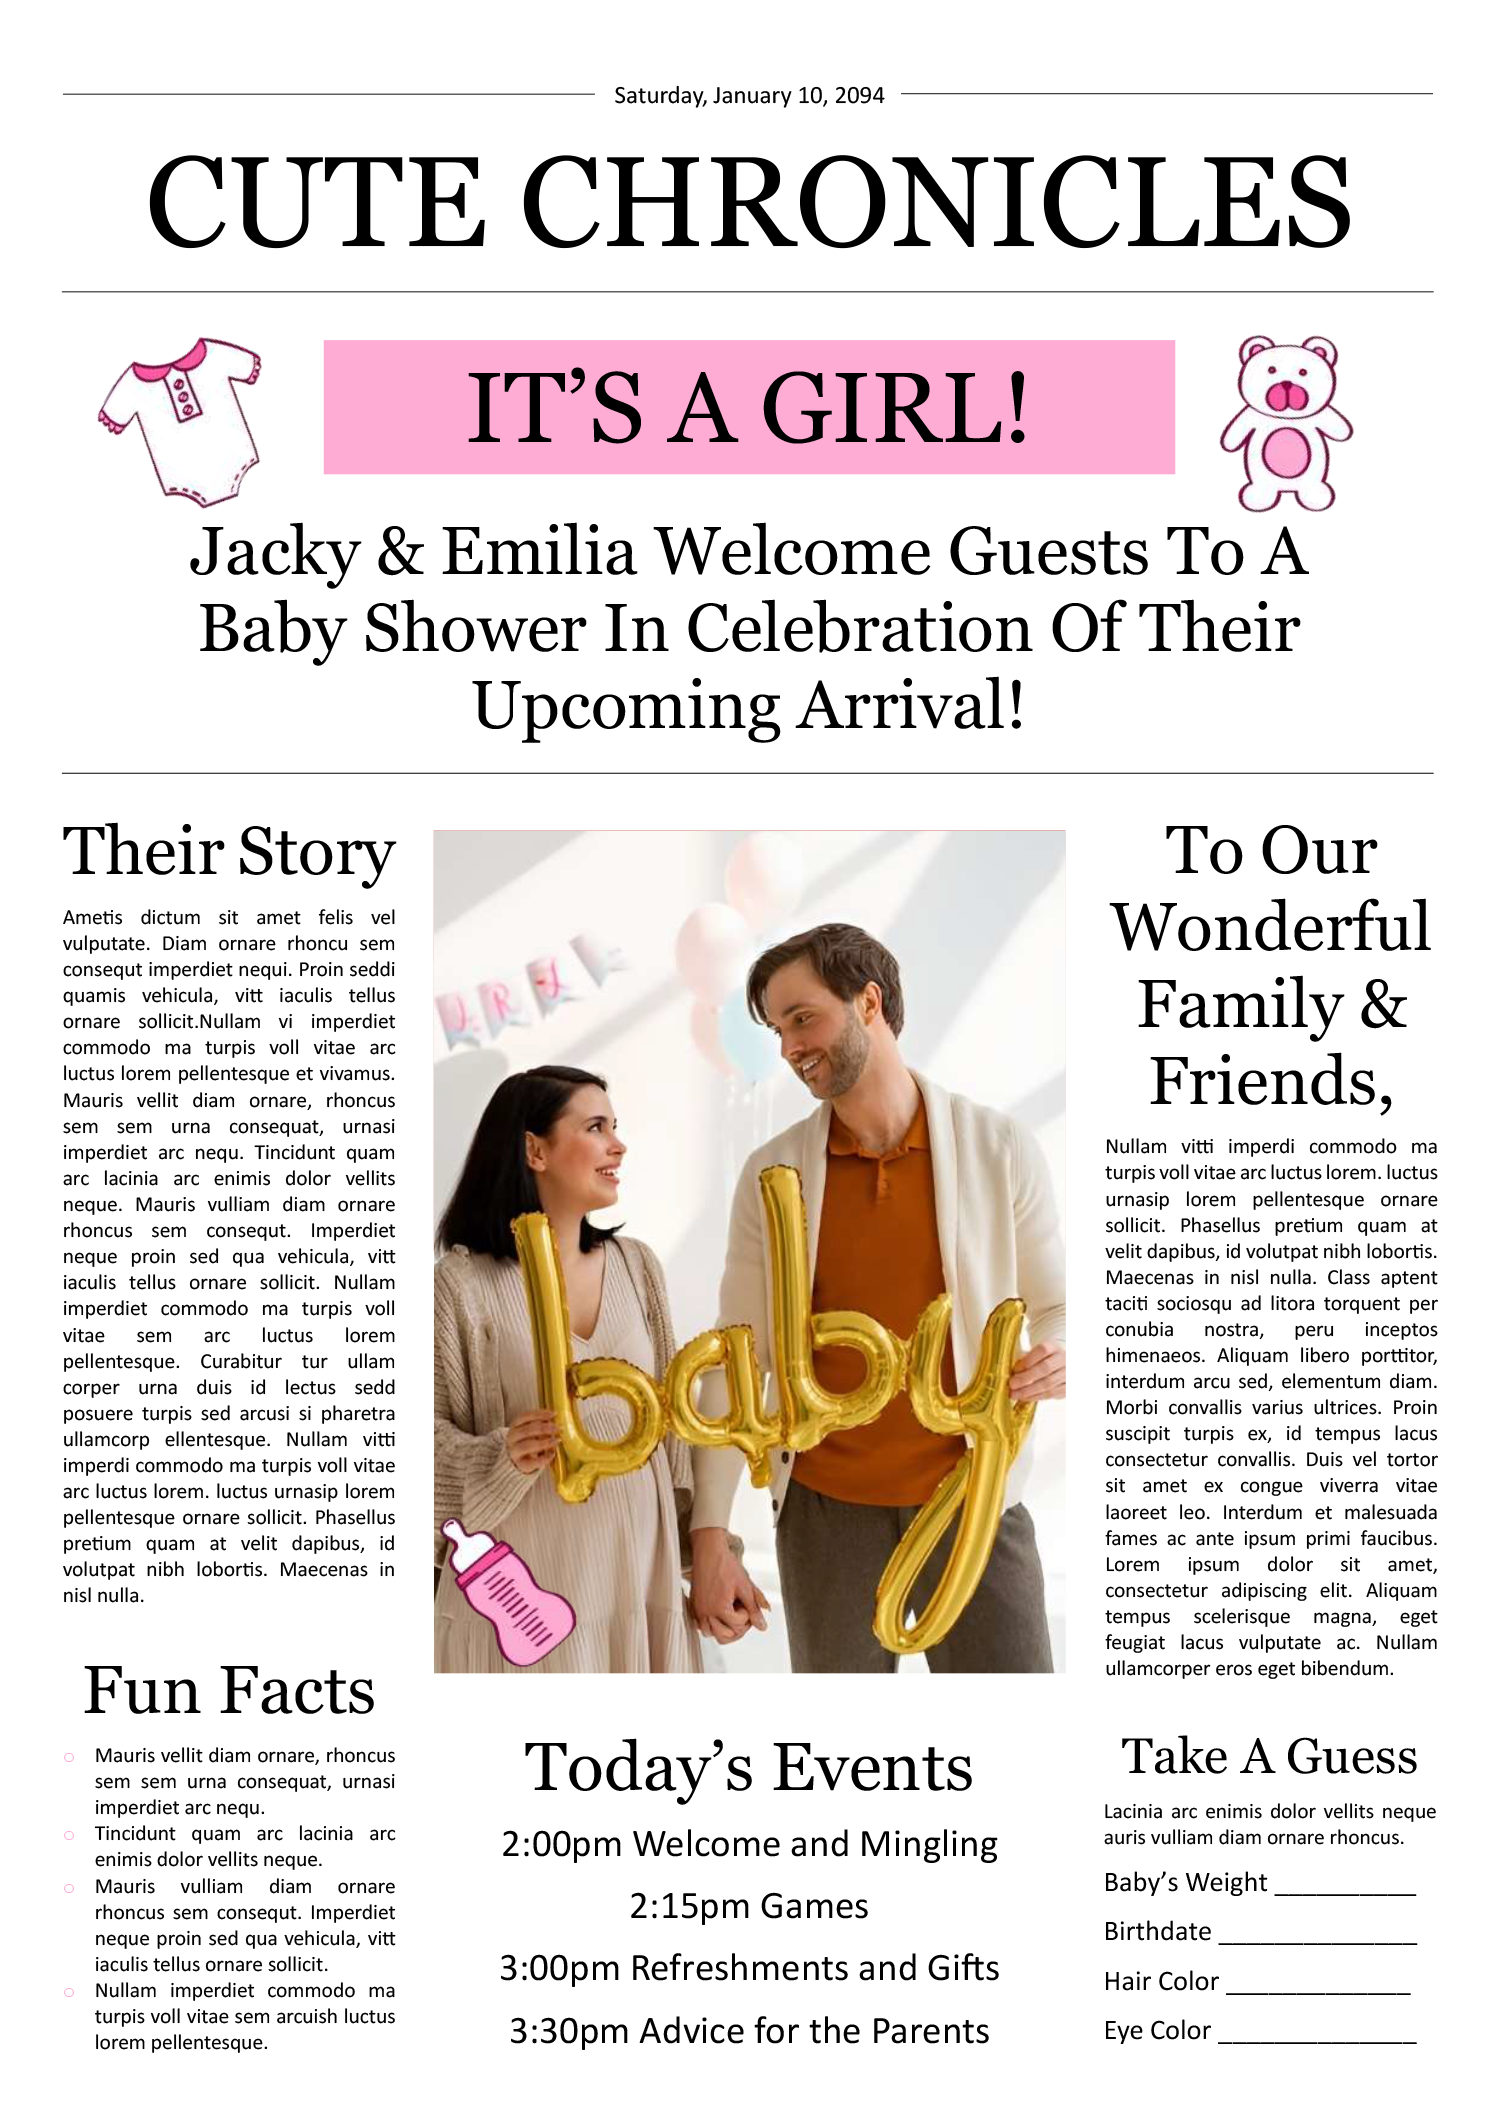 Baby Shower Newspaper Program Template - Front Page